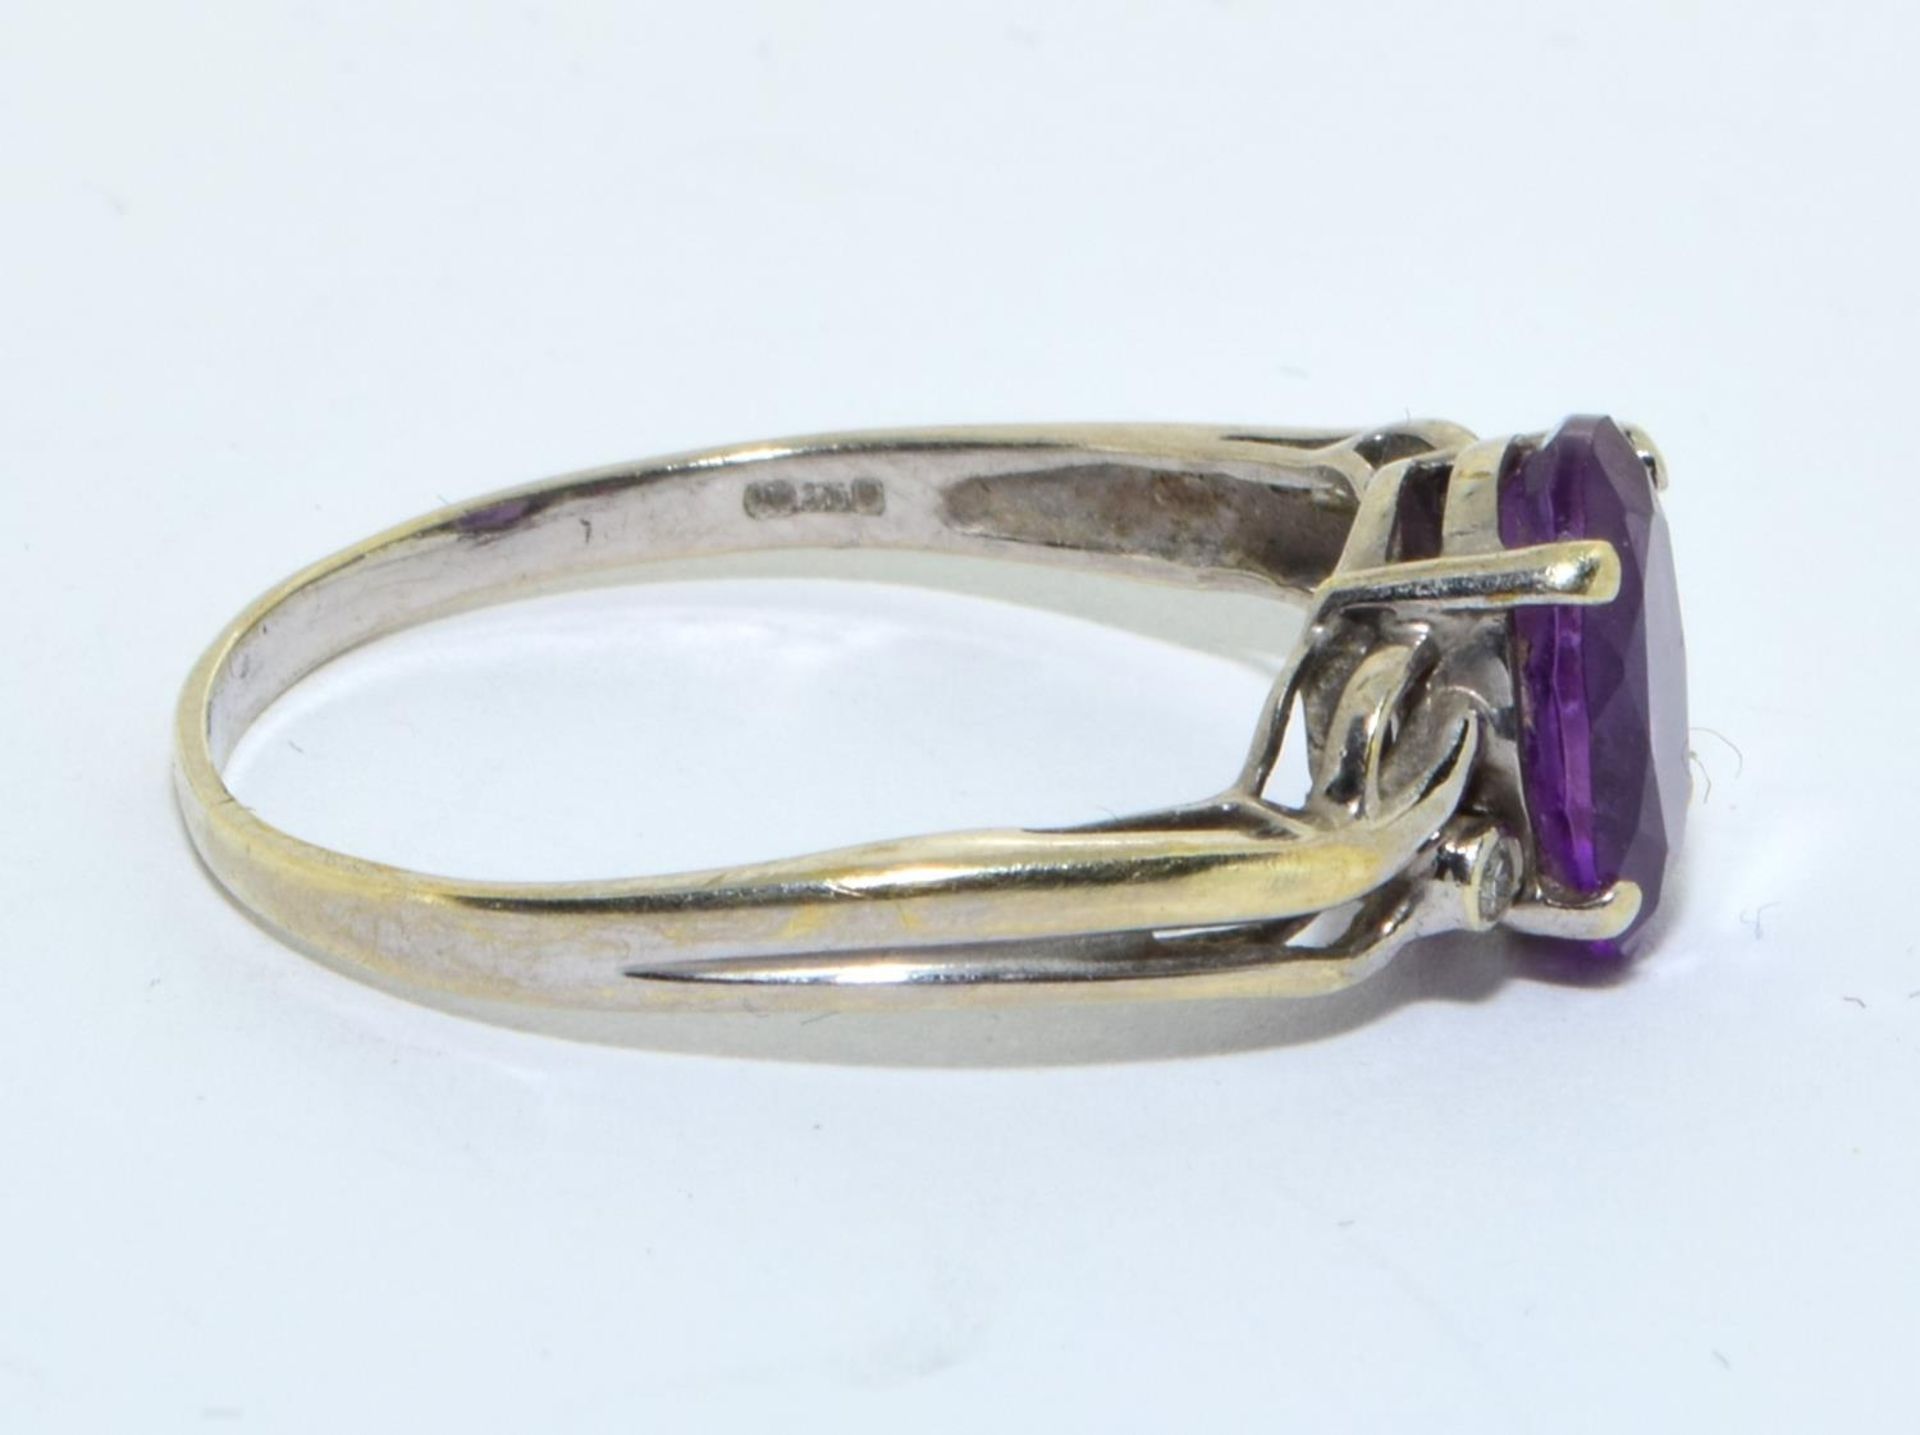 9ct white gold ladies Amethyst and diamond open work setting ring size S - Image 4 of 5